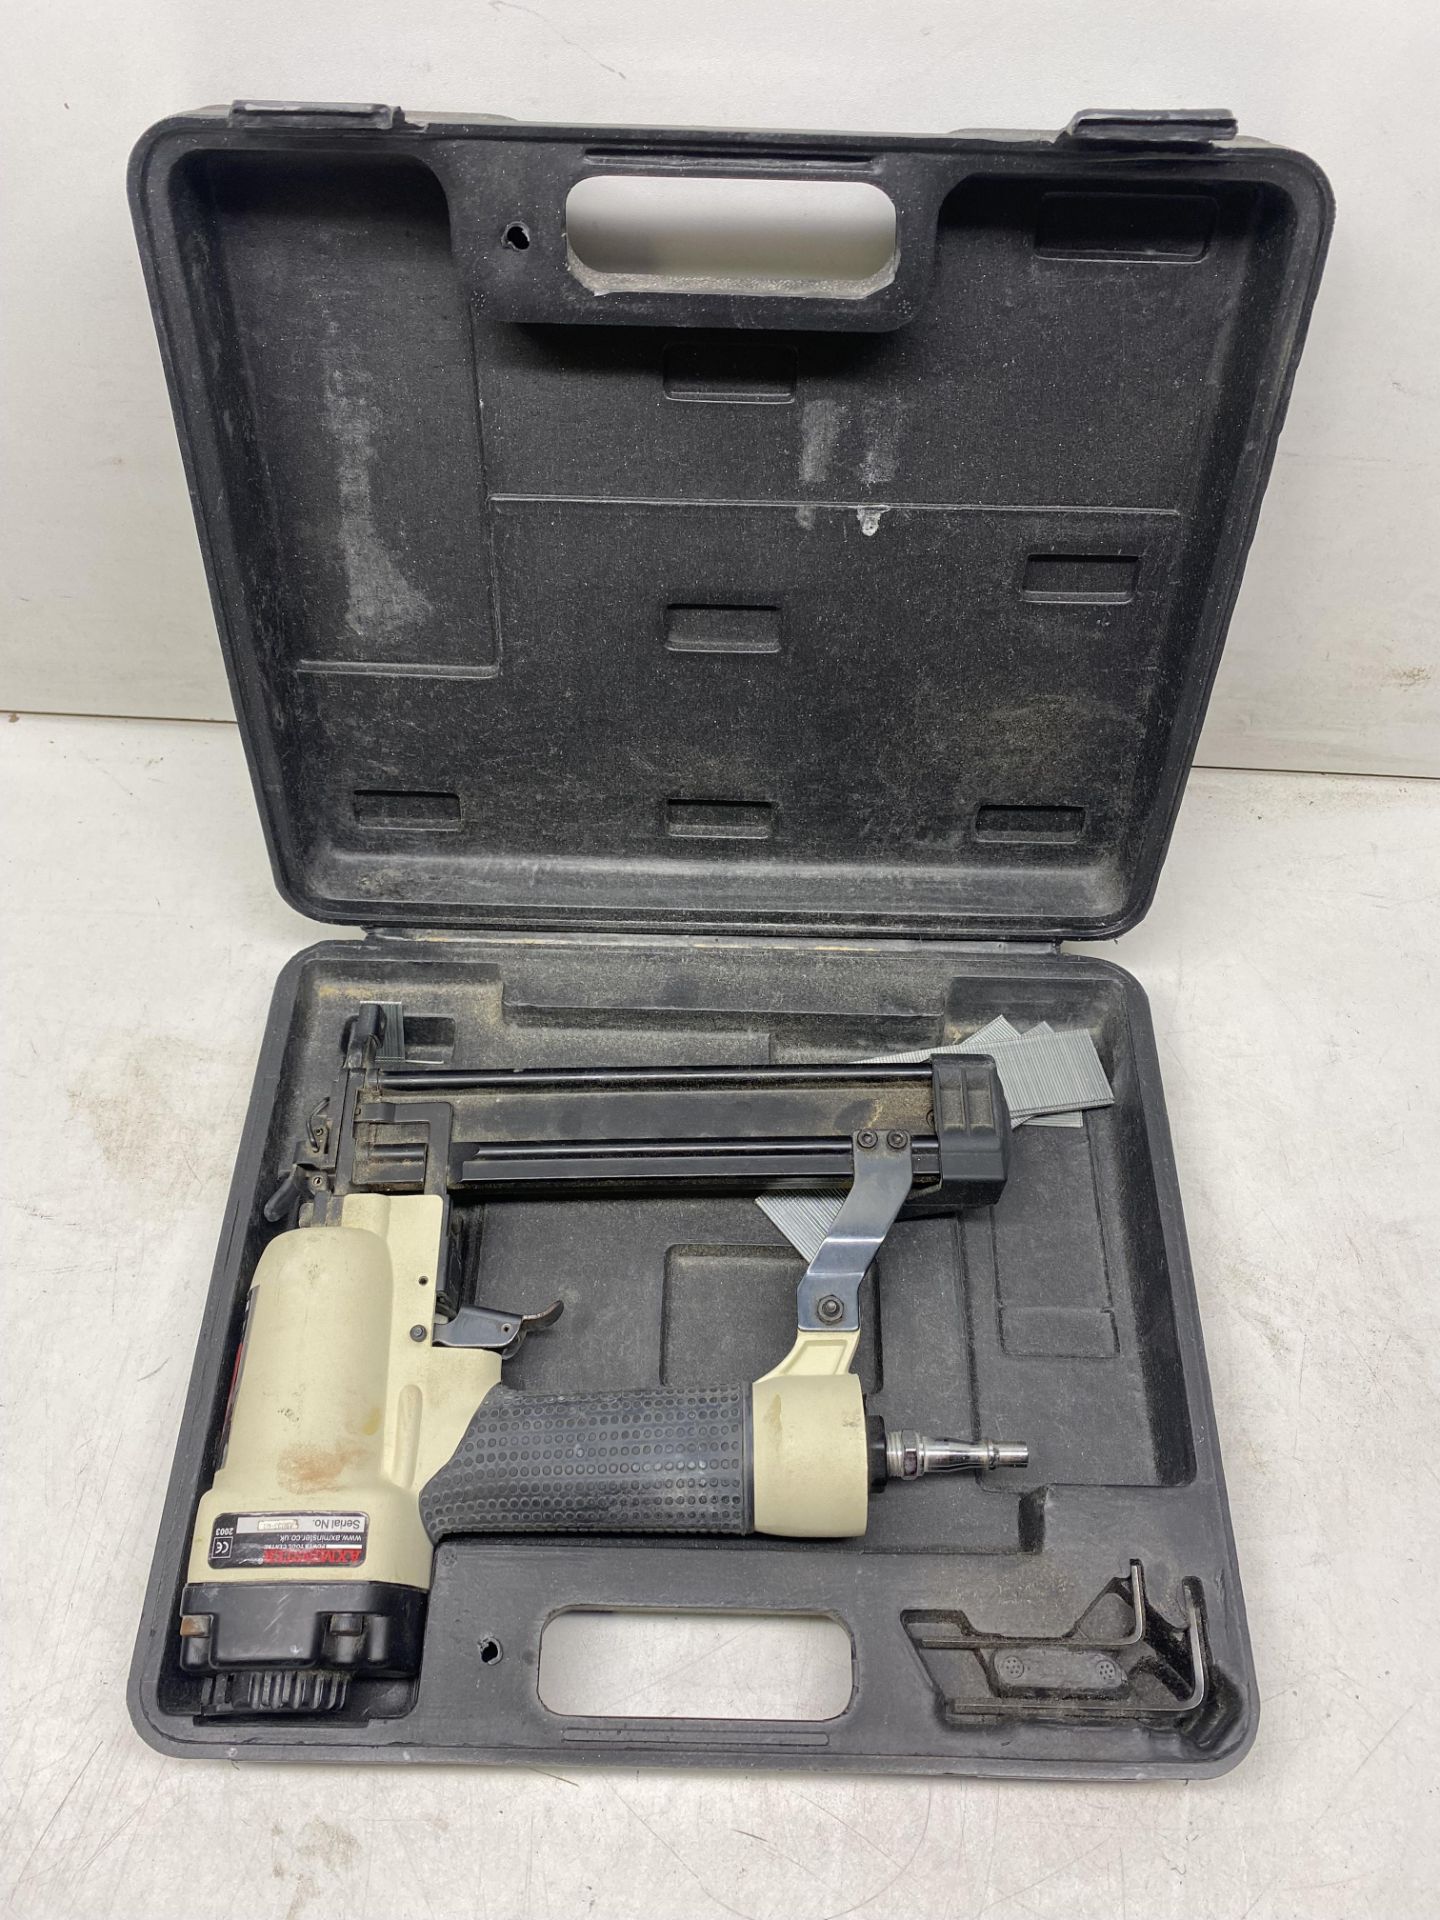 2 x Axminster Air AW32NS Nailers/Staplers - Image 6 of 9